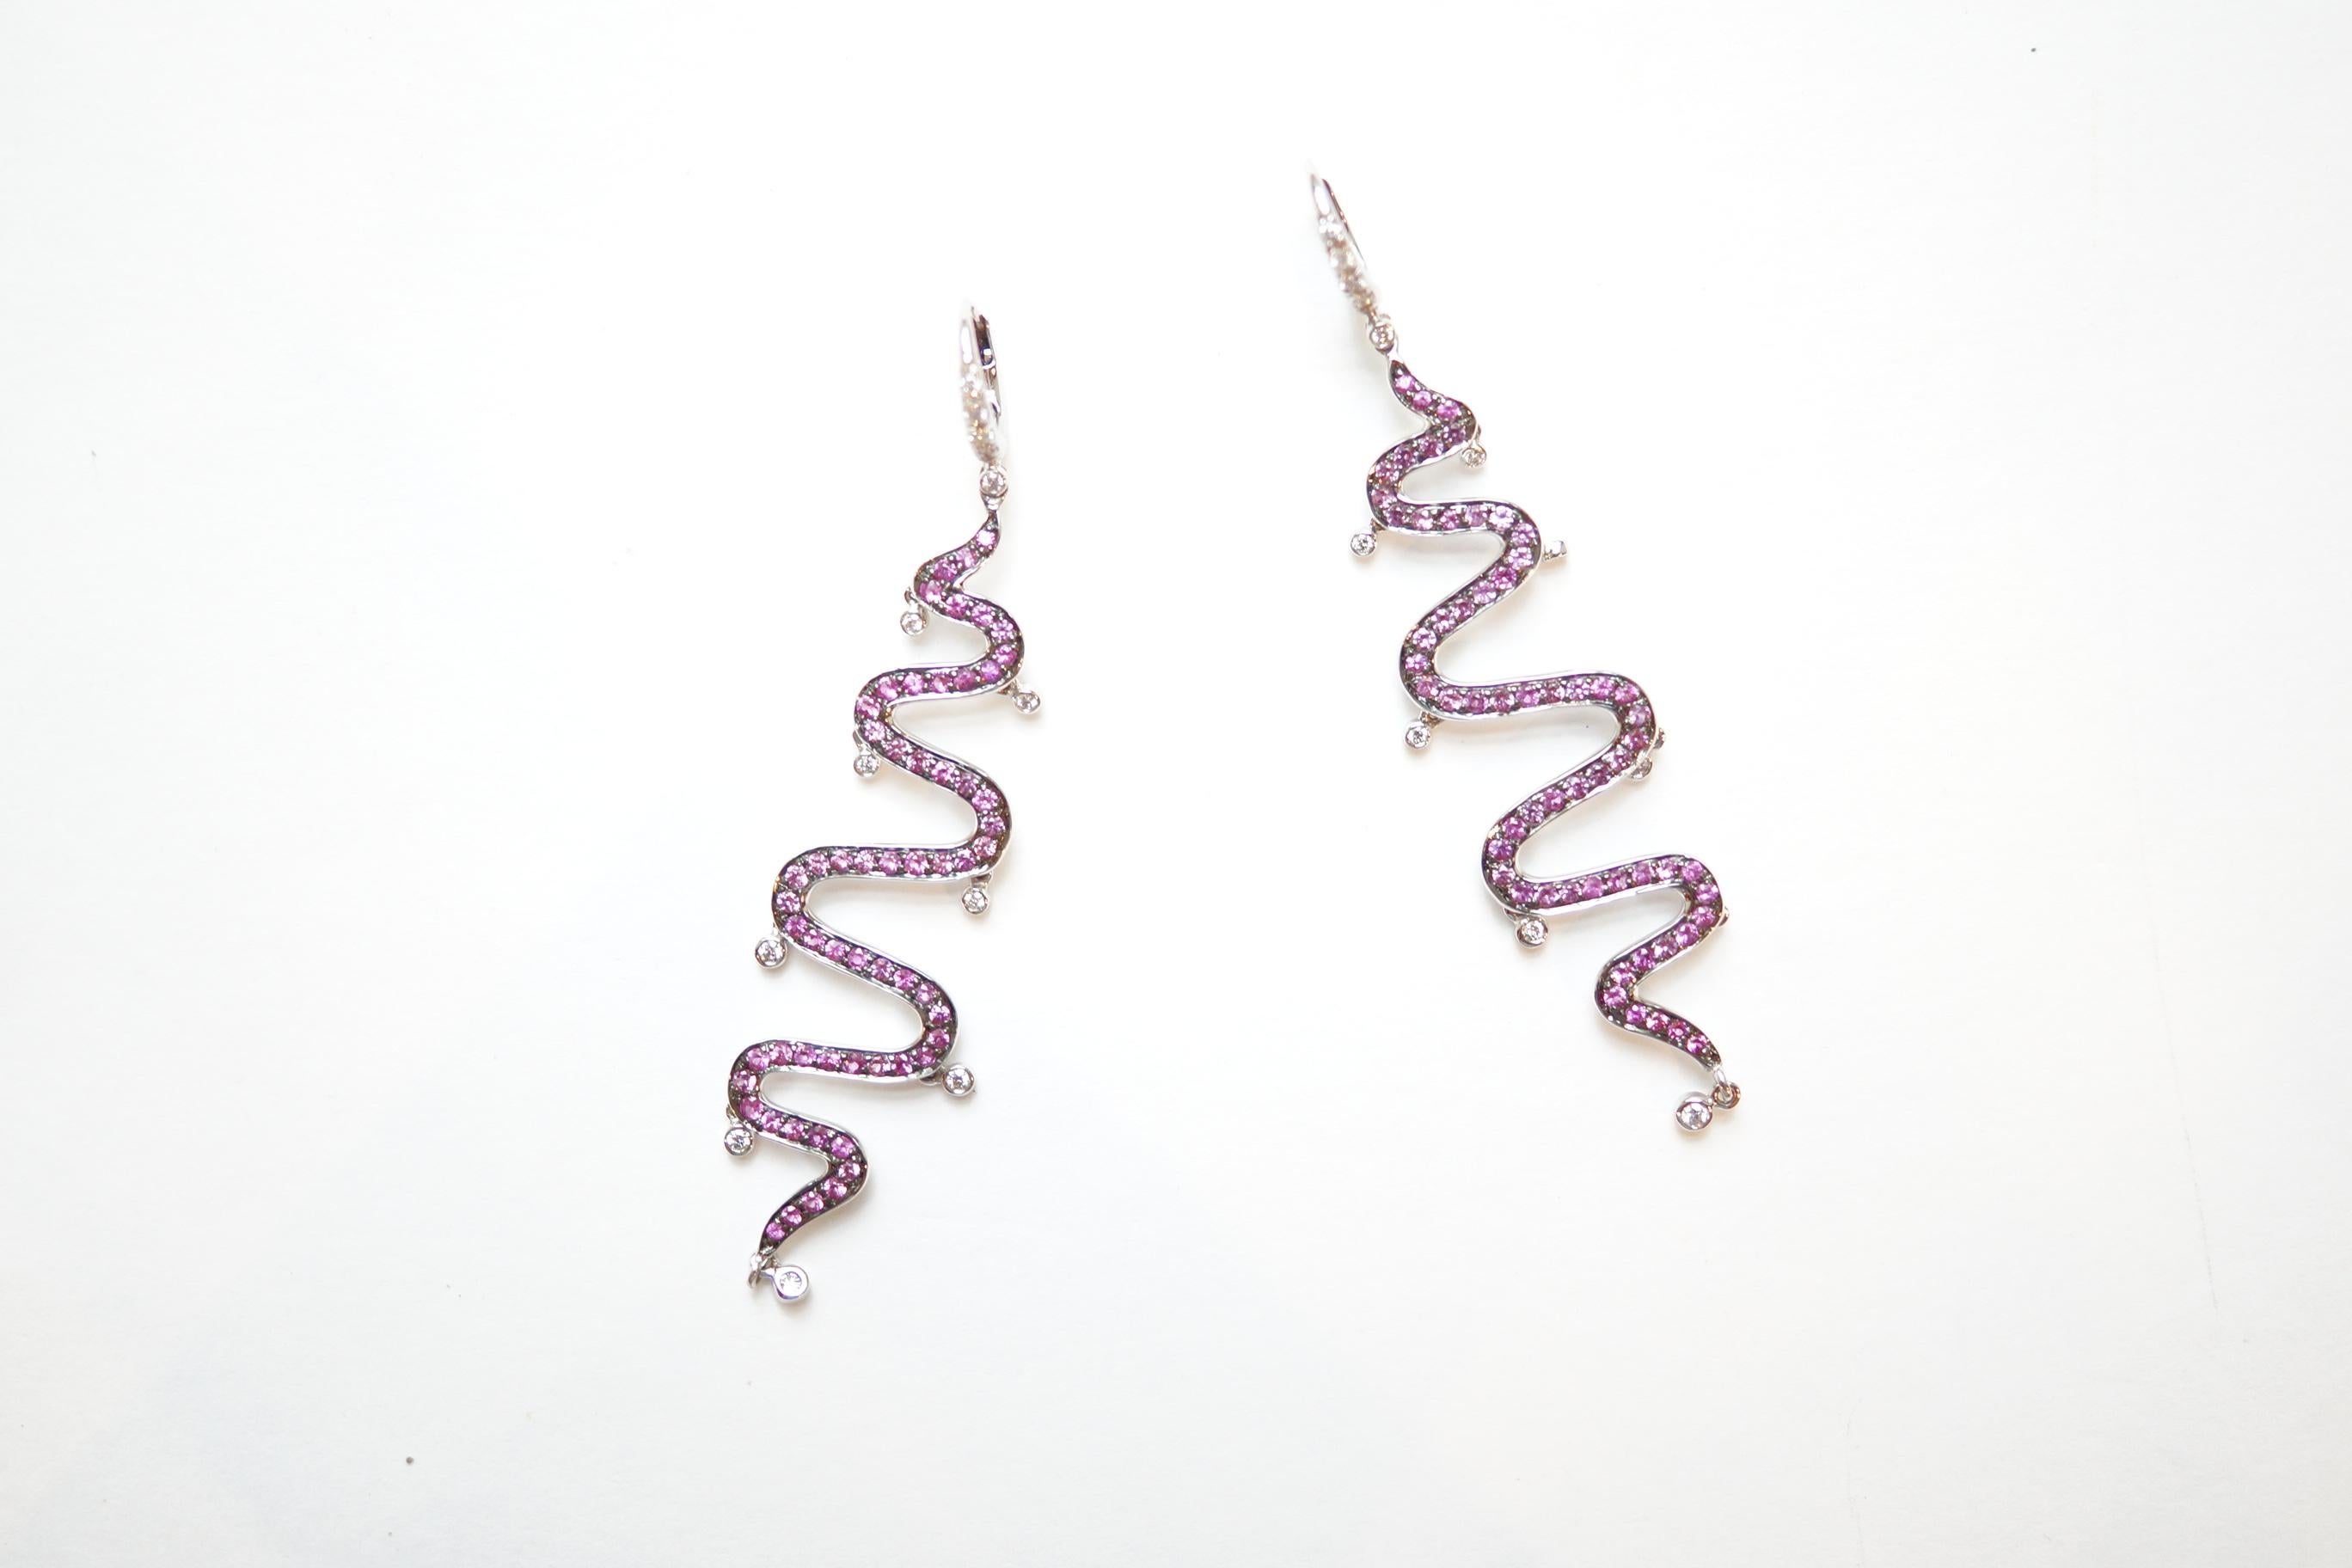 Shimmee® Swirl Earrings
A pair of eighteen-karat white gold earrings in a delicate undulating design.  Each earring consists of a line of pink sapphires that snakes downwards from a white diamond earwire, adorned at each of the eight curvatures with